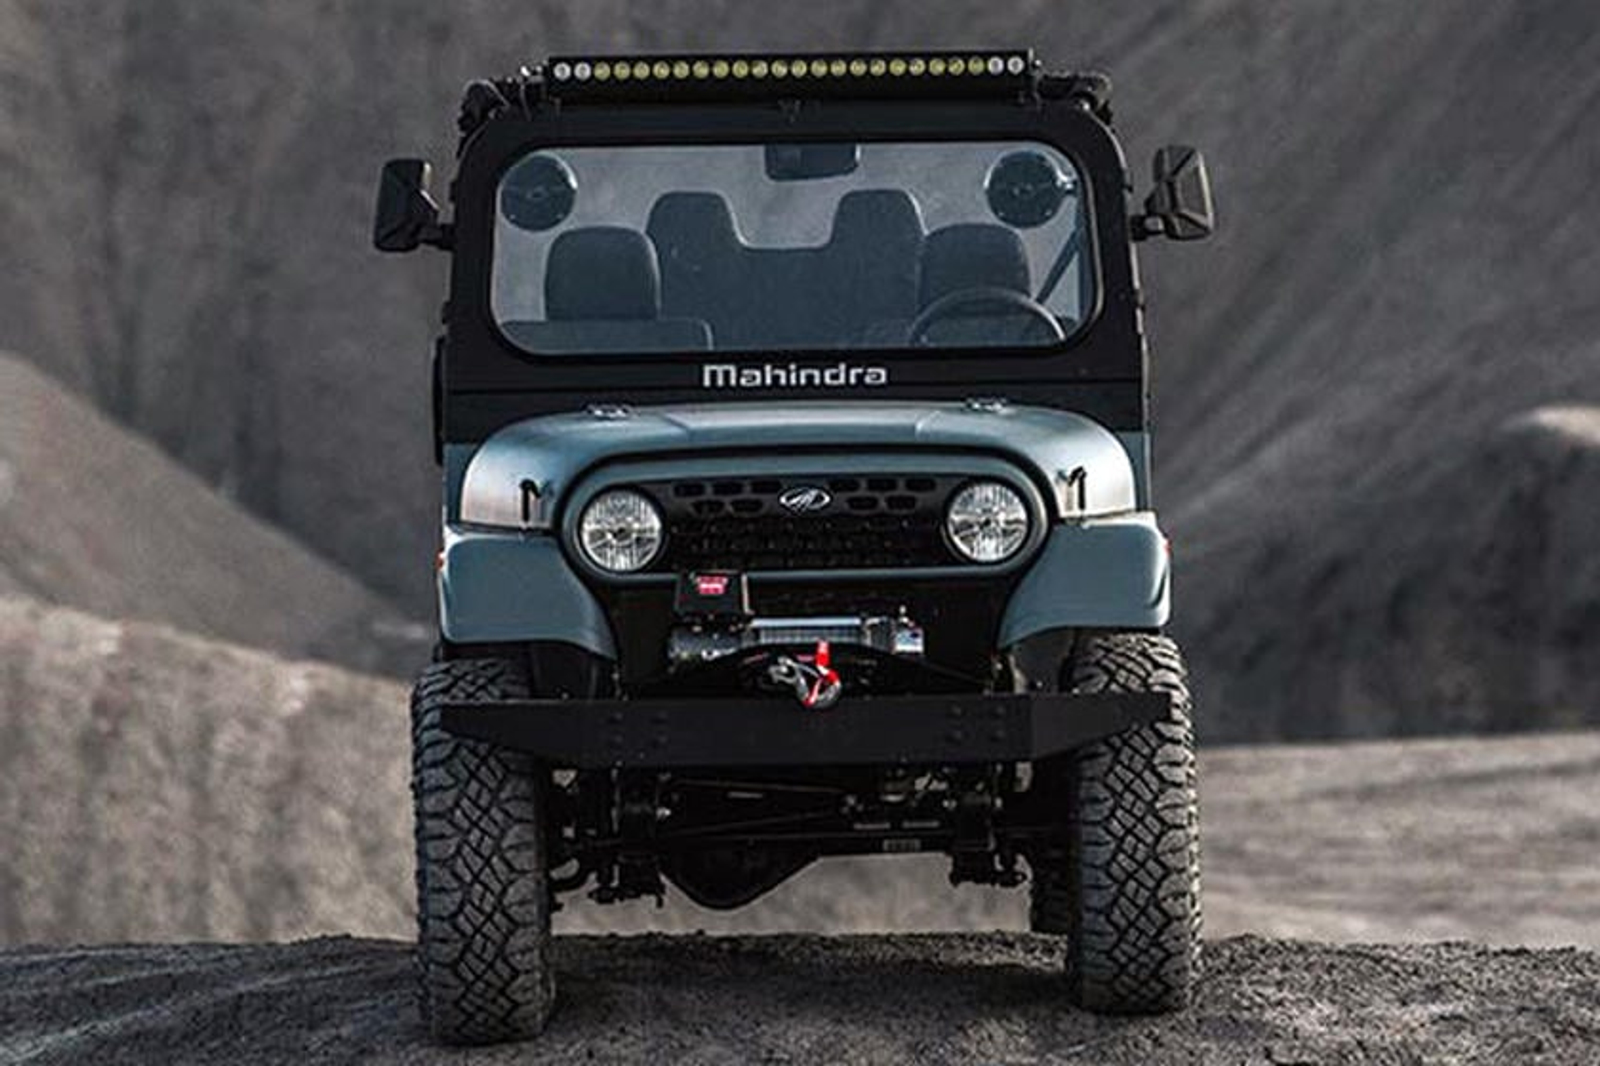 government, mahindra's jeep wrangler doppelganger cleared to sell in america